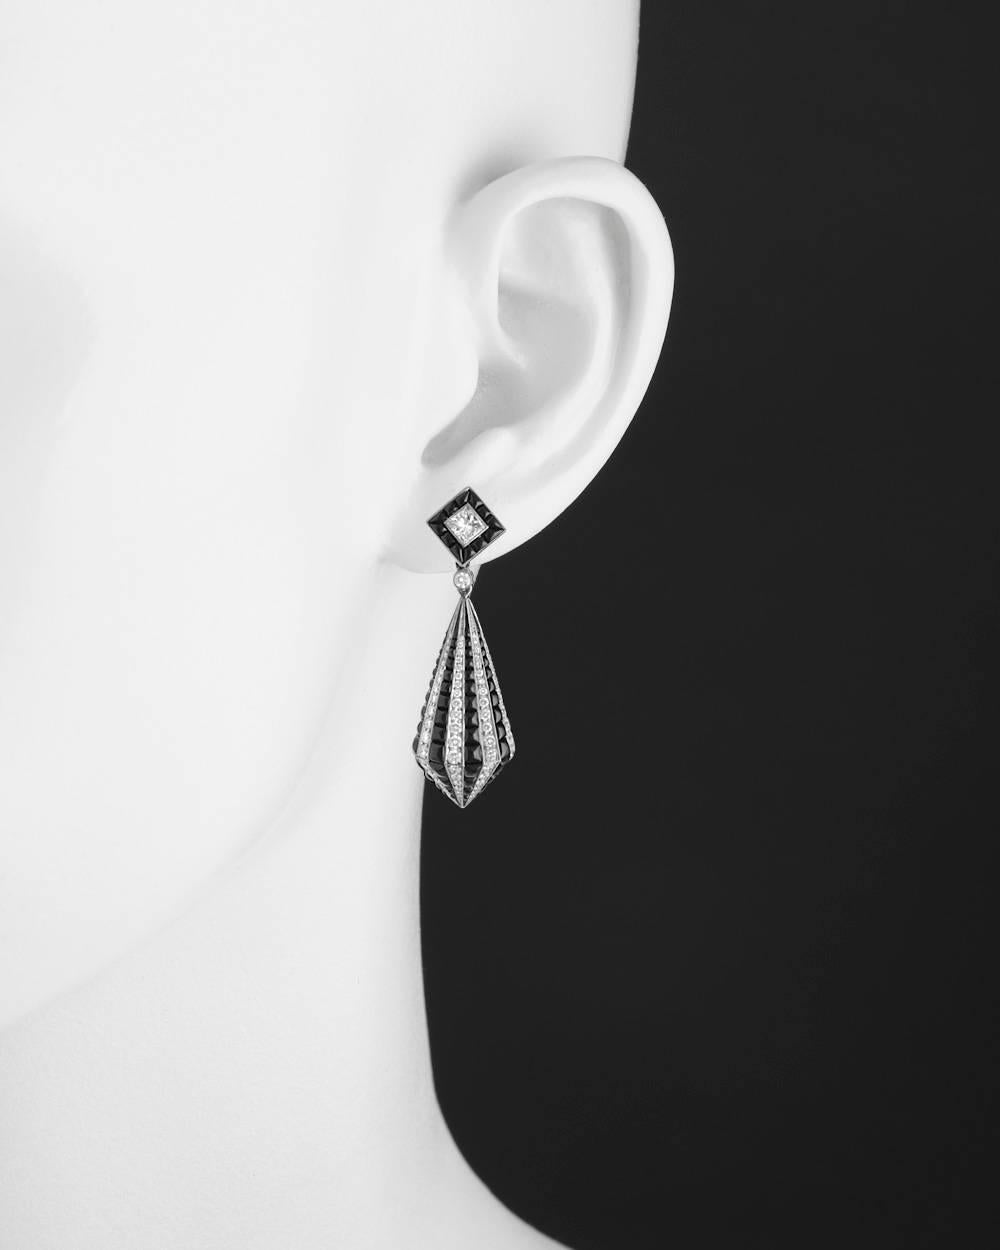 Drop earrings, featuring an elongated kite-shaped drop set with alternating vertically-set 'stripes' of graduated round brilliant-cut diamonds and cabochon-cut black onyx, suspended from a square-shaped surmount centering a square-cut diamond framed